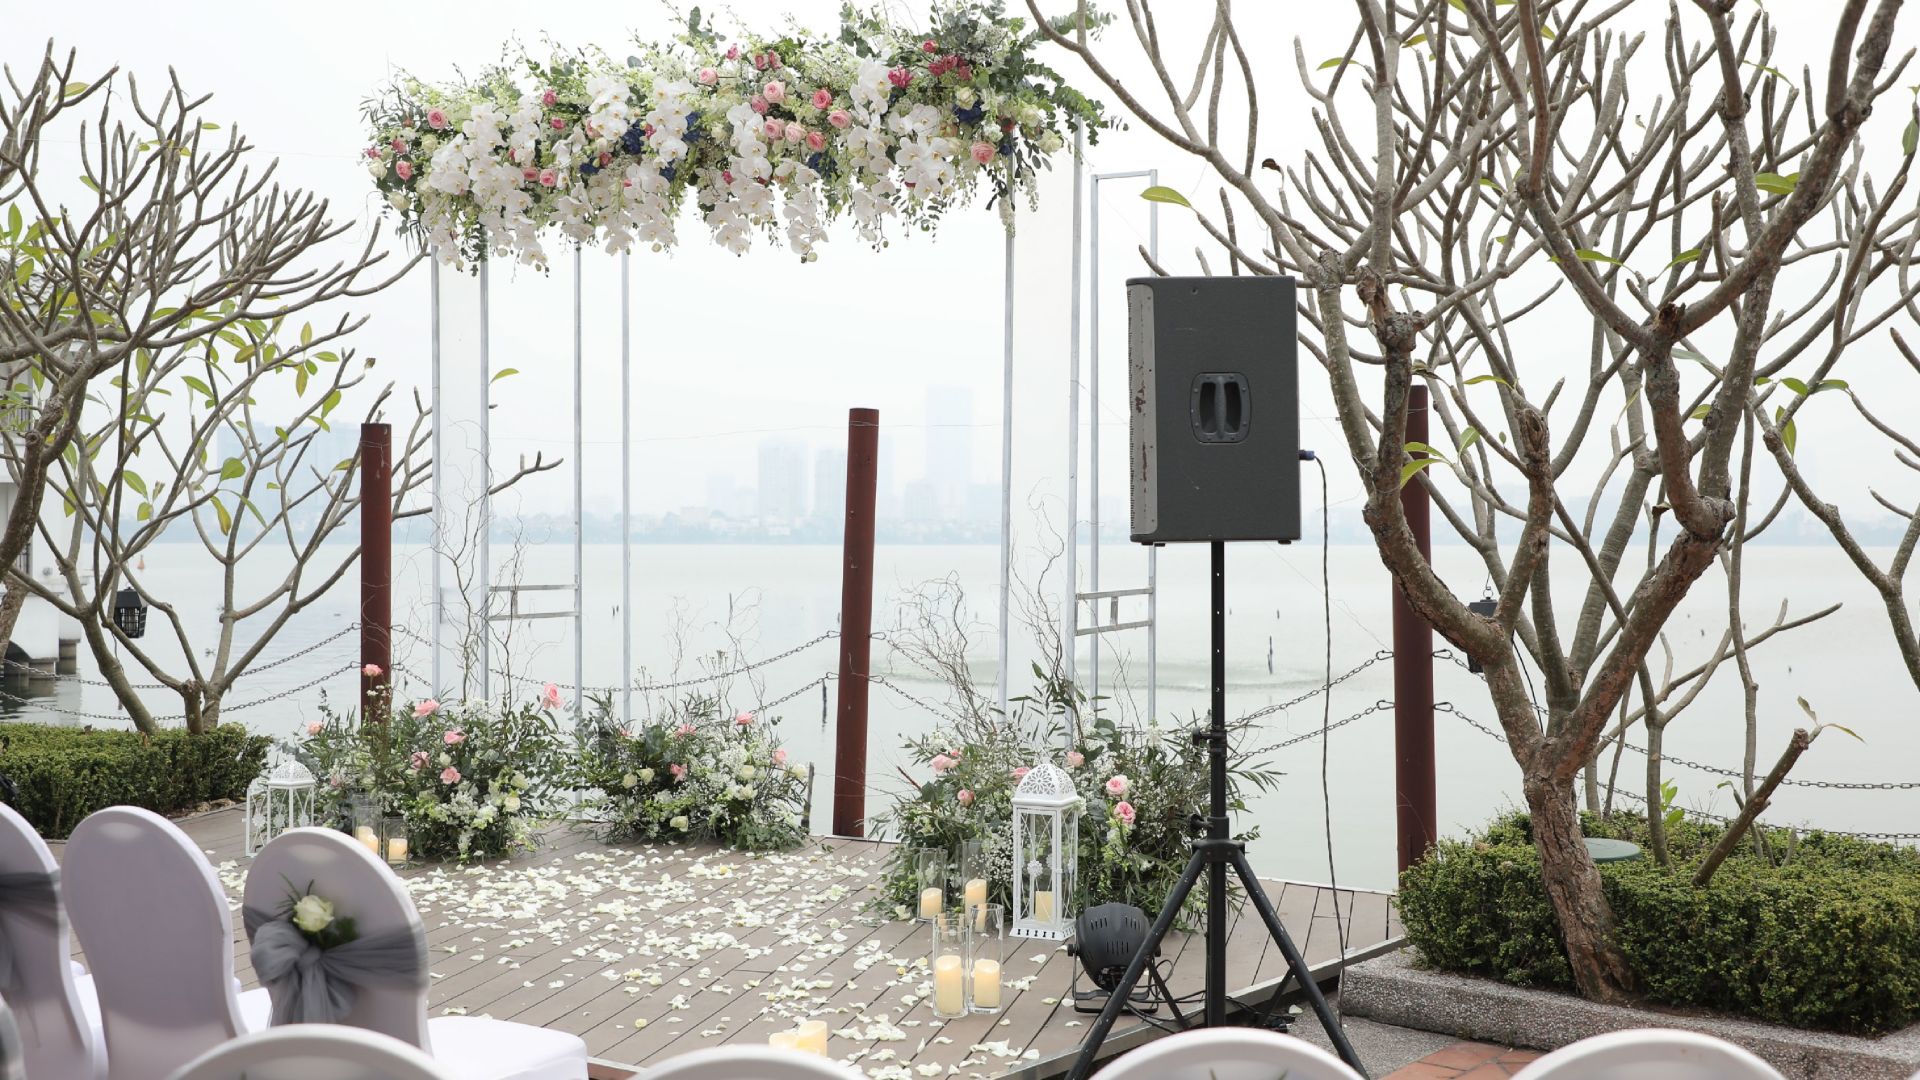 A Table With A Speaker And Flowers On It